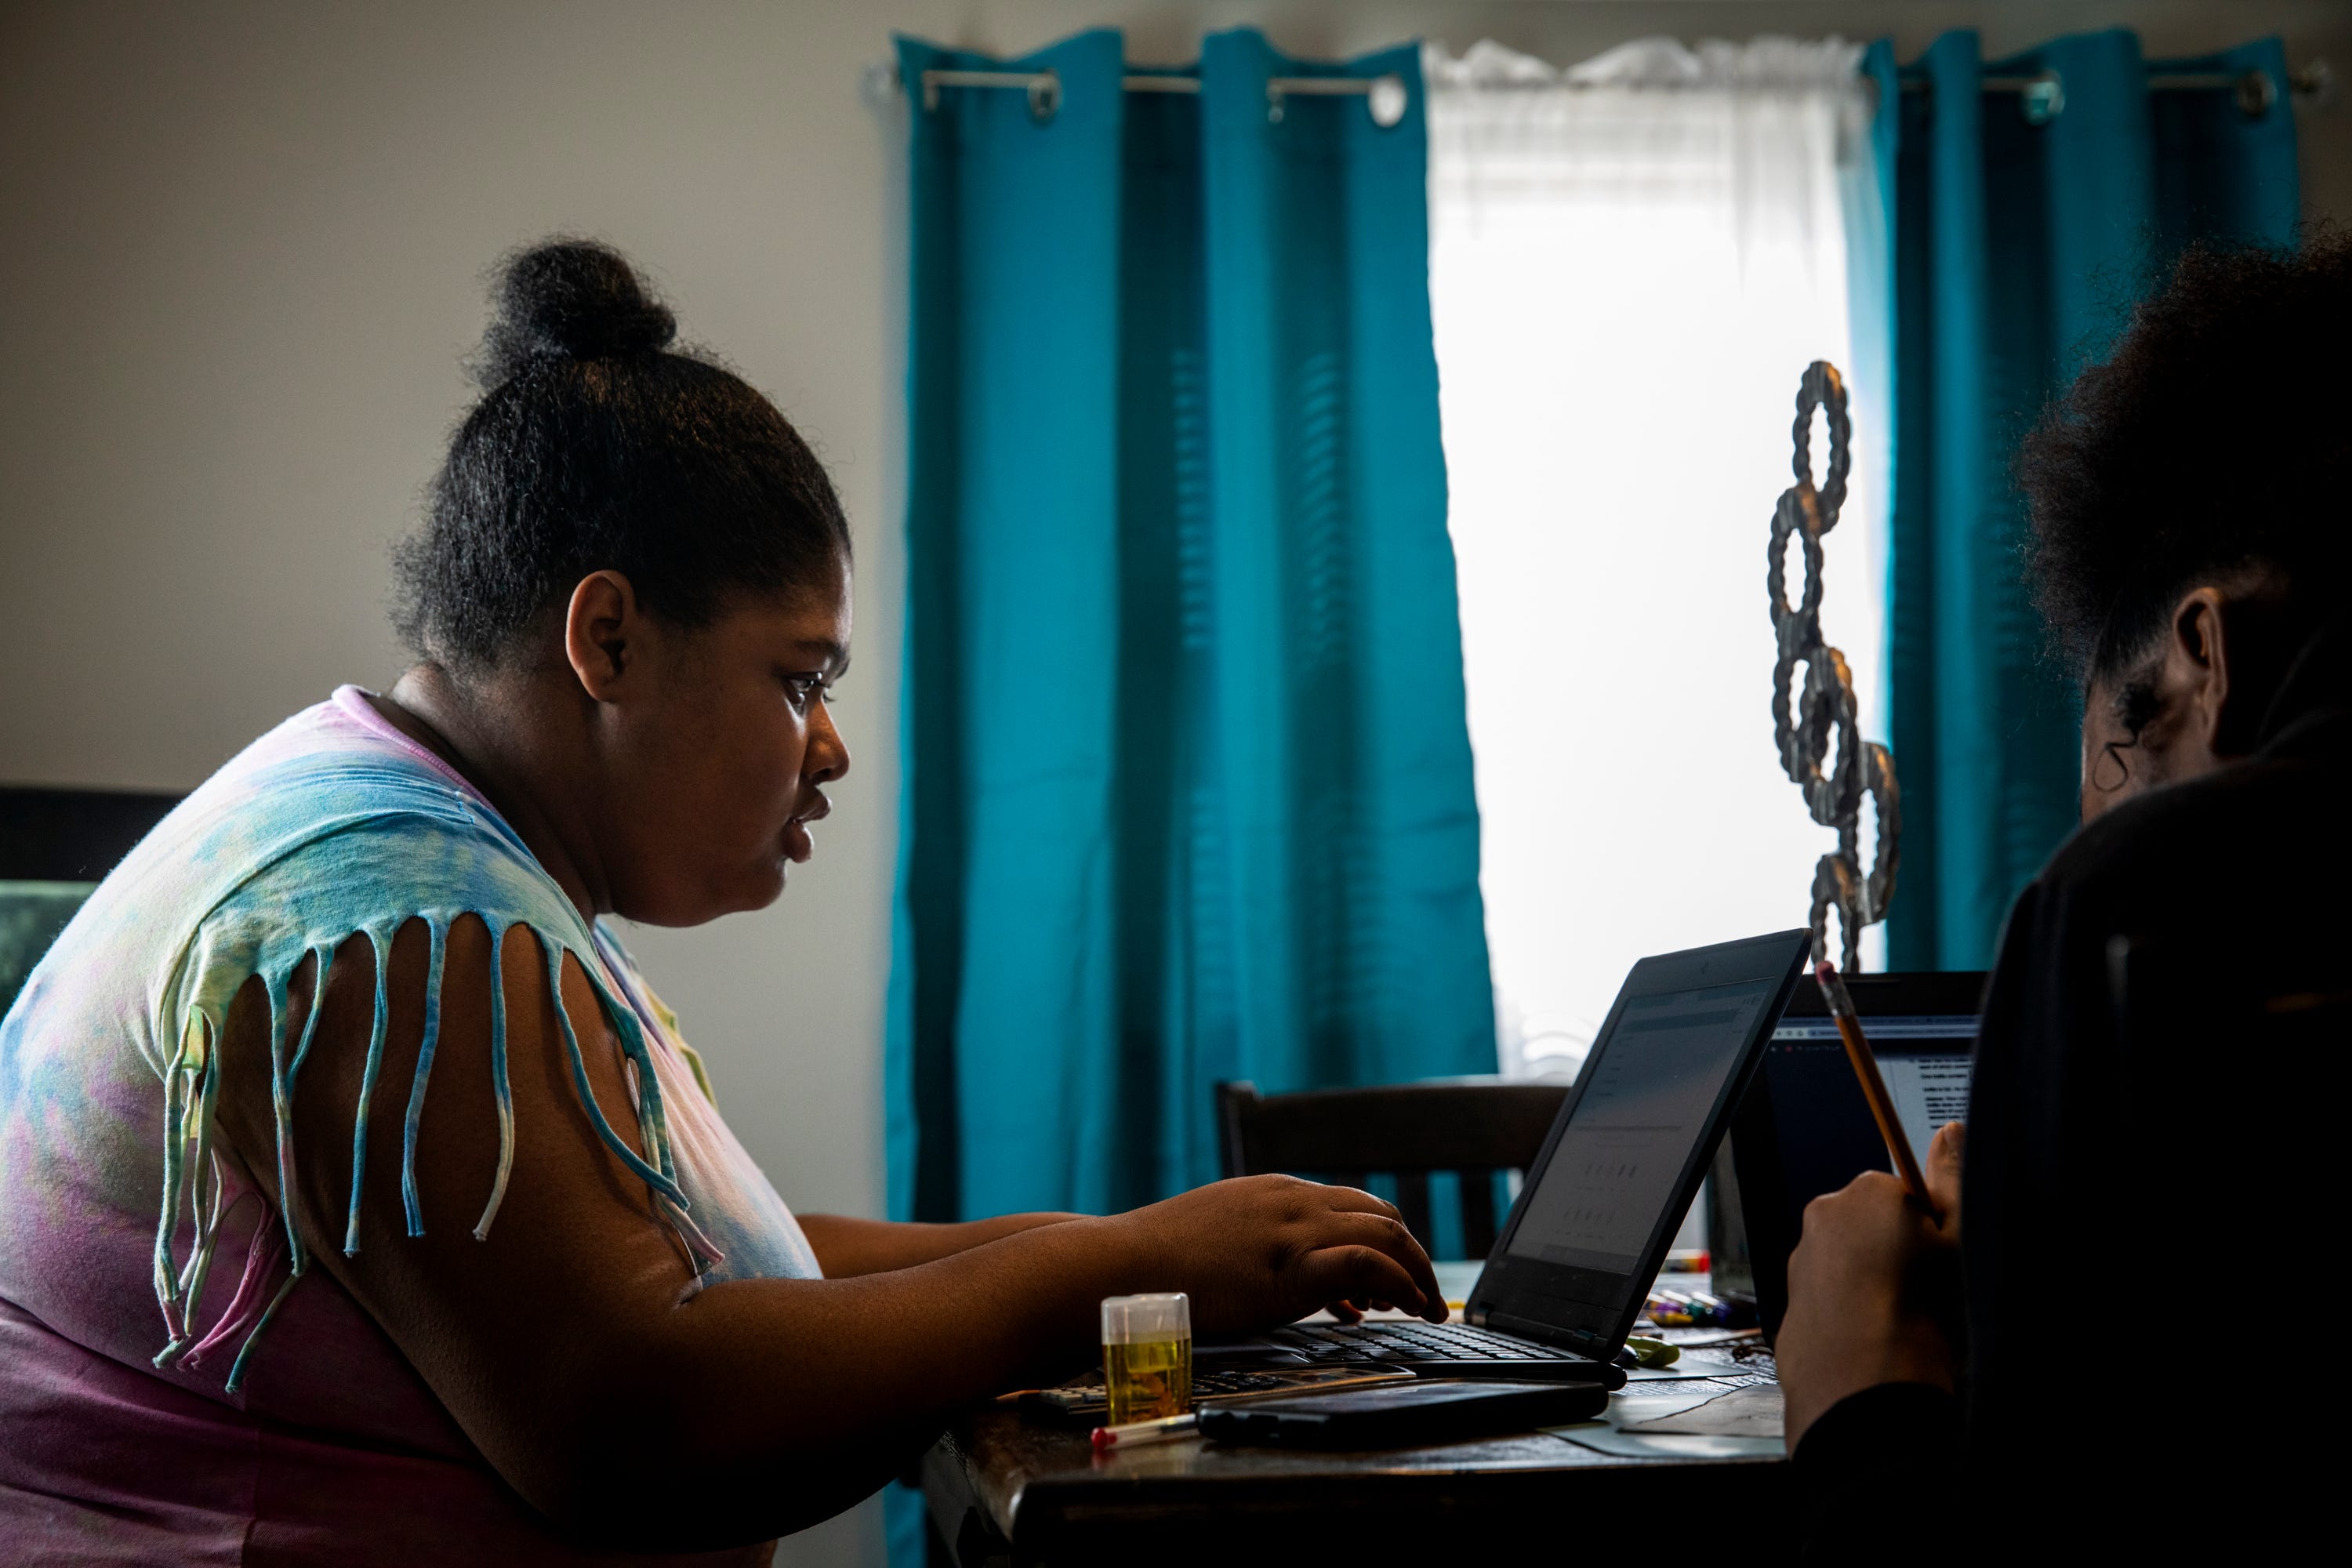 Curiah Simpson, 18, works on her school work at the dining room table in her home in North College Hill on Thursday, April 2, 2020. She is a senior at Diamond Oaks. Simpson said, "I'm sad that I'm not able to graduate and walk. I've waited my whole life to graduate high school."